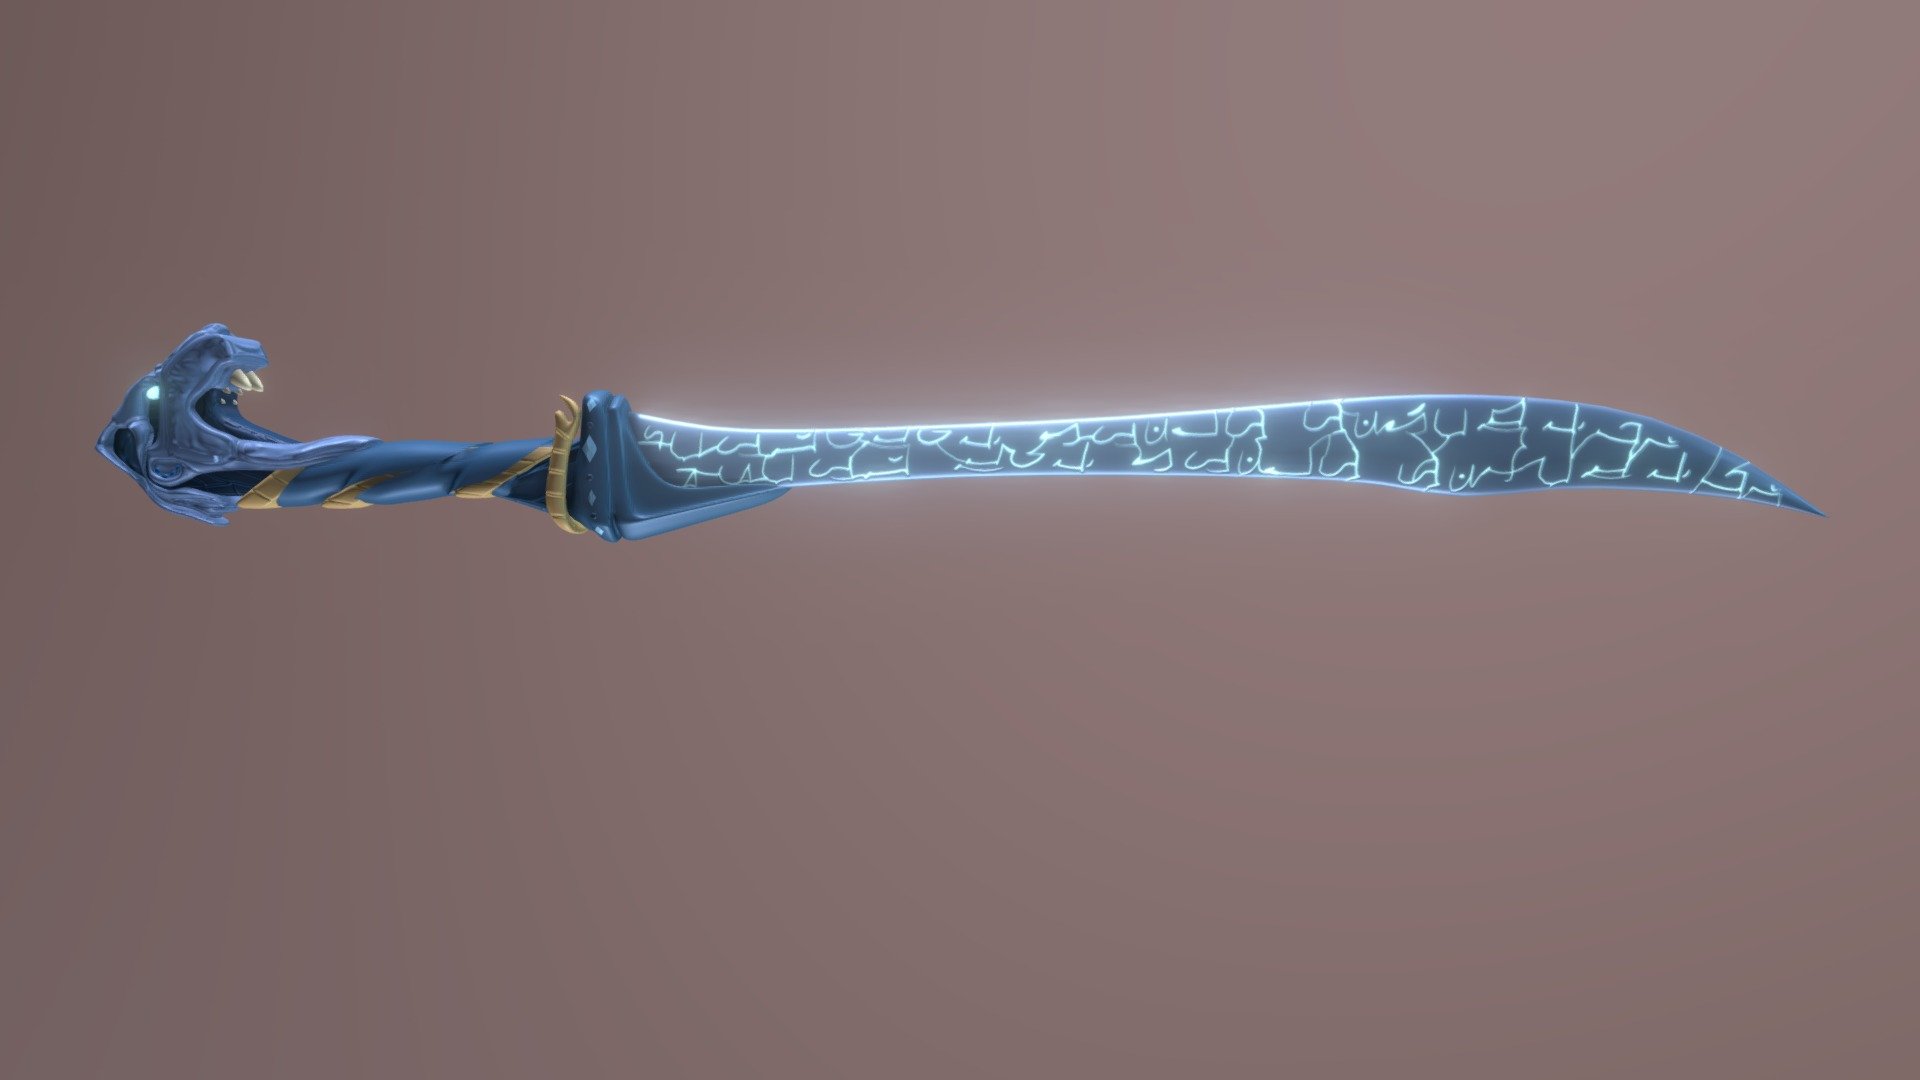 A fantasy sword model based on concept art in the D&amp;D Dungeon Master's Guide book. Modeled, UV mapped, rigged, and animated in Blender, with textures done in Photoshop, and tested in Unity 3d model